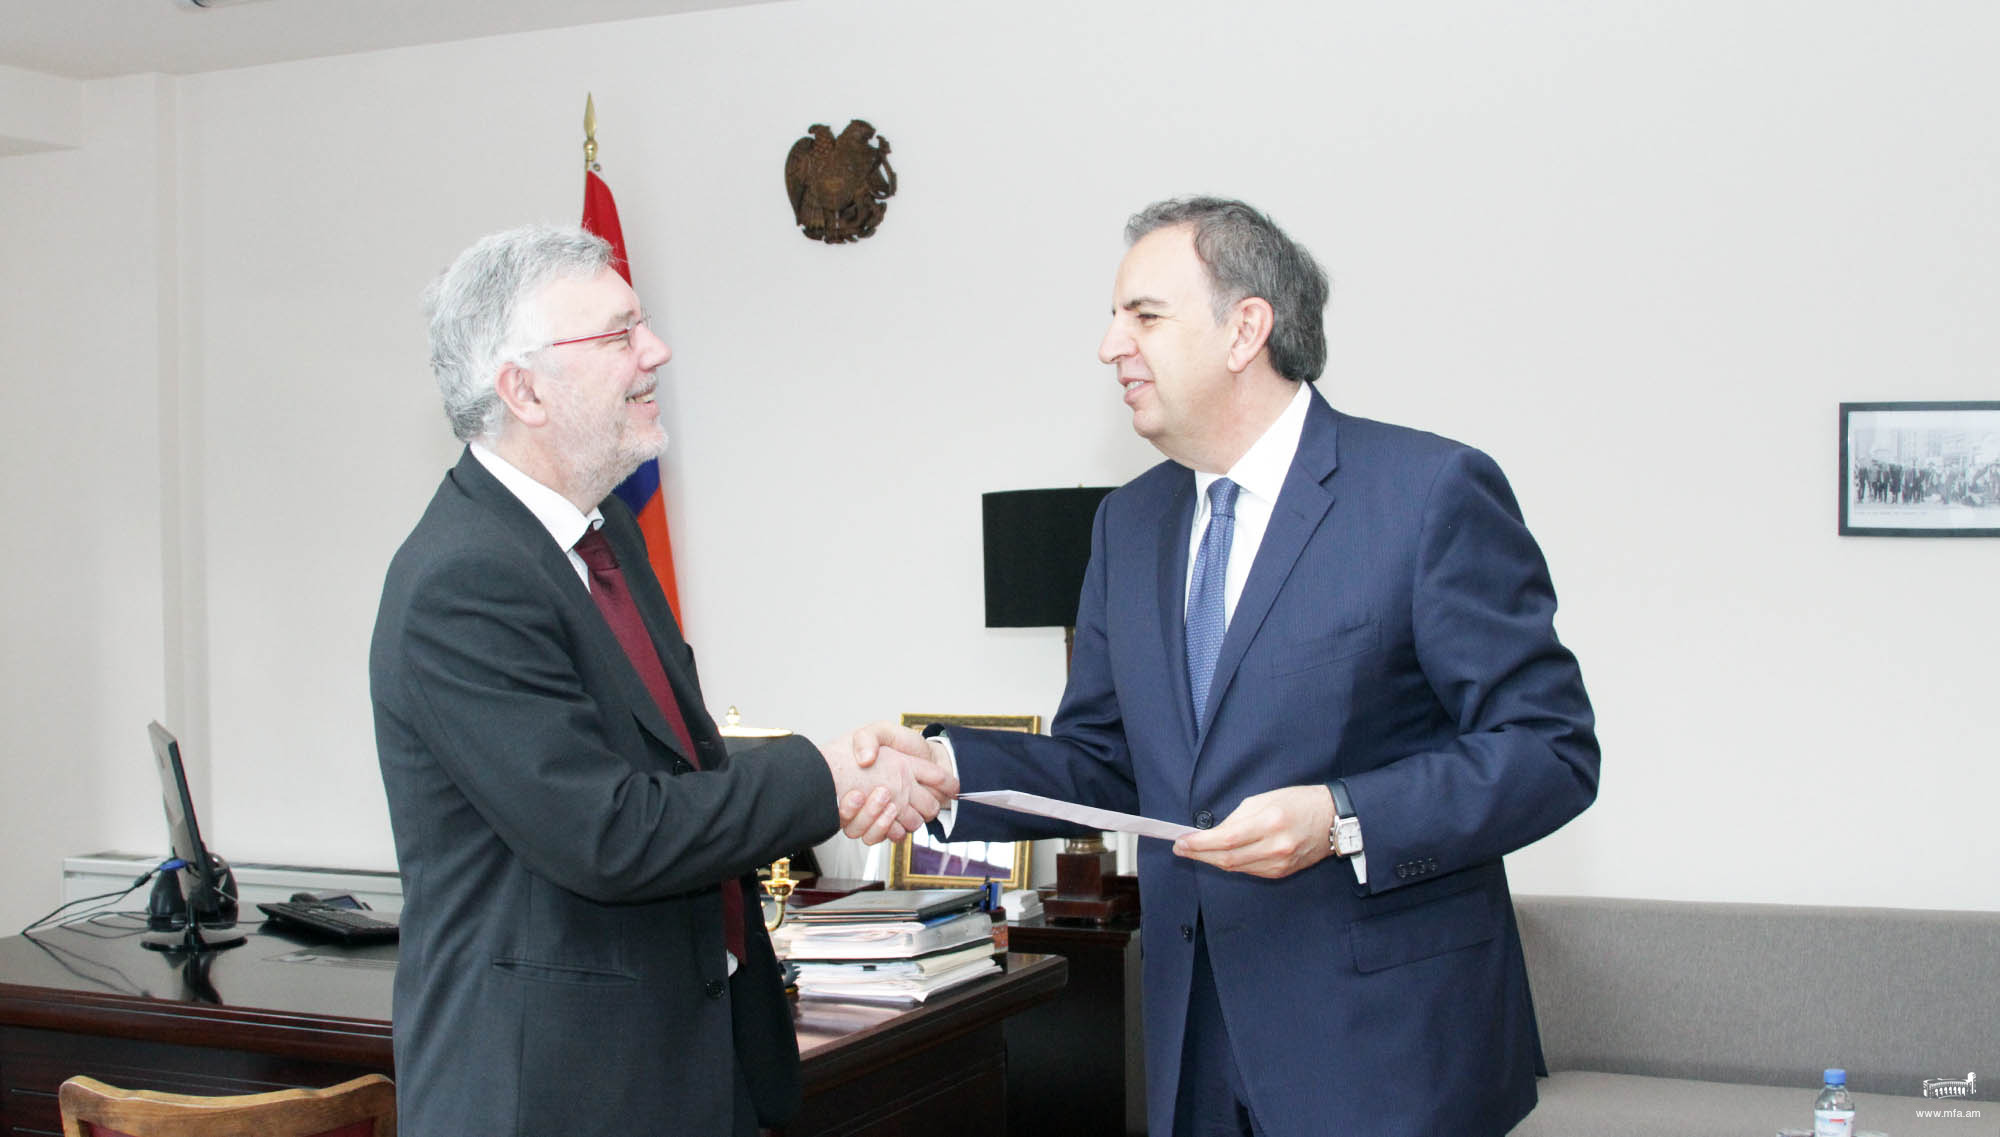 Ambassador of the Kingdom of Belgium handed over copies of his credentials to Deputy Foreign Minister of the Republic of Armenia